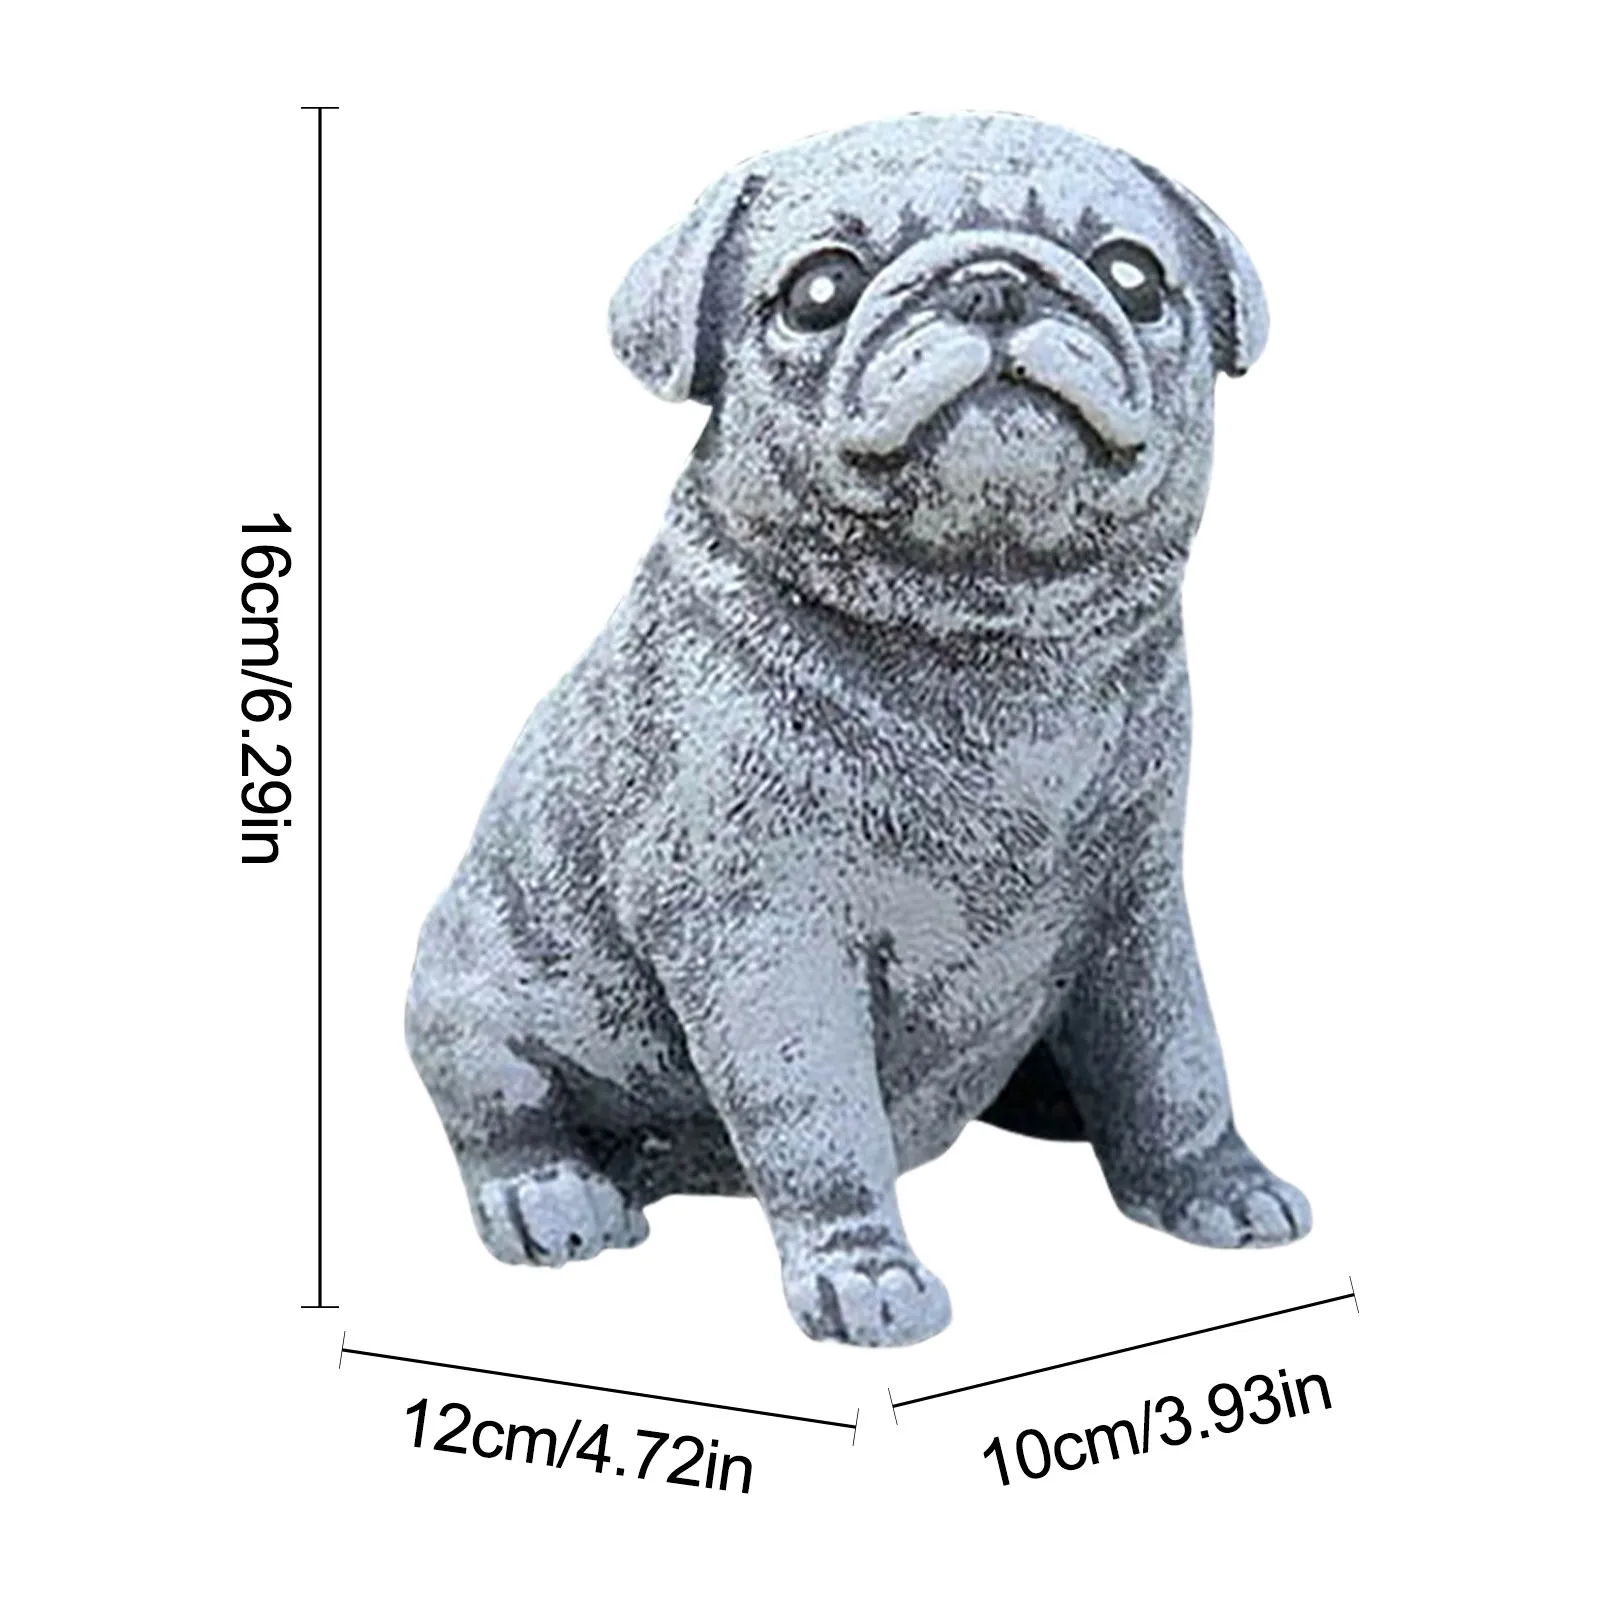 Garden Dog Statues Outdoor Decor Pug Dog Statue Adorable Sitting Dog Figurine Resin Puppy Sculpture Decoration Realistic Outdoor images - 6